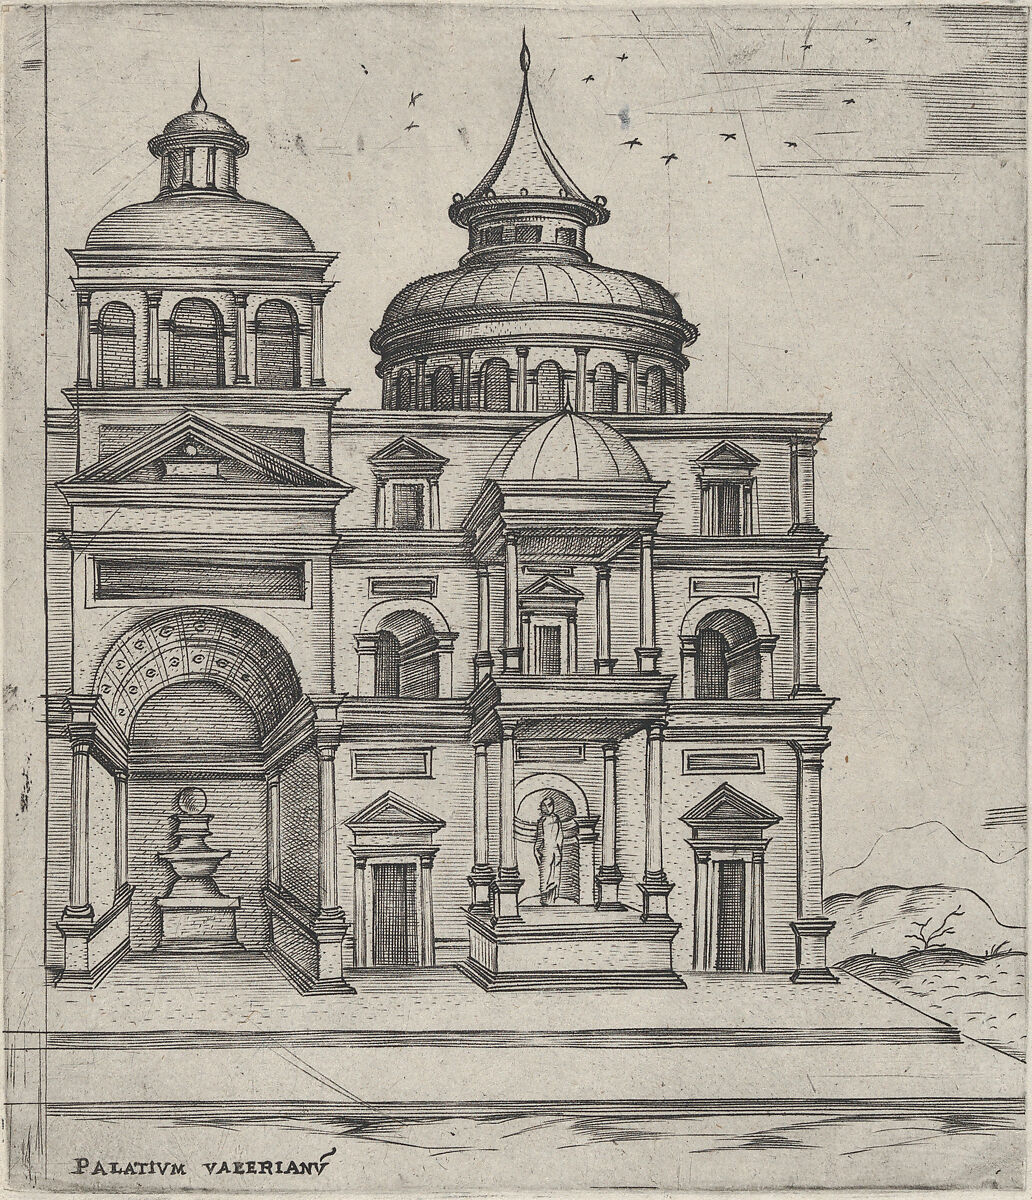 Palatium Valerianu[m], from a Series of 24 Depicting (Reconstructed) Buildings from Roman Antiquity, Anonymous, Italian, 16th century, Engraving 